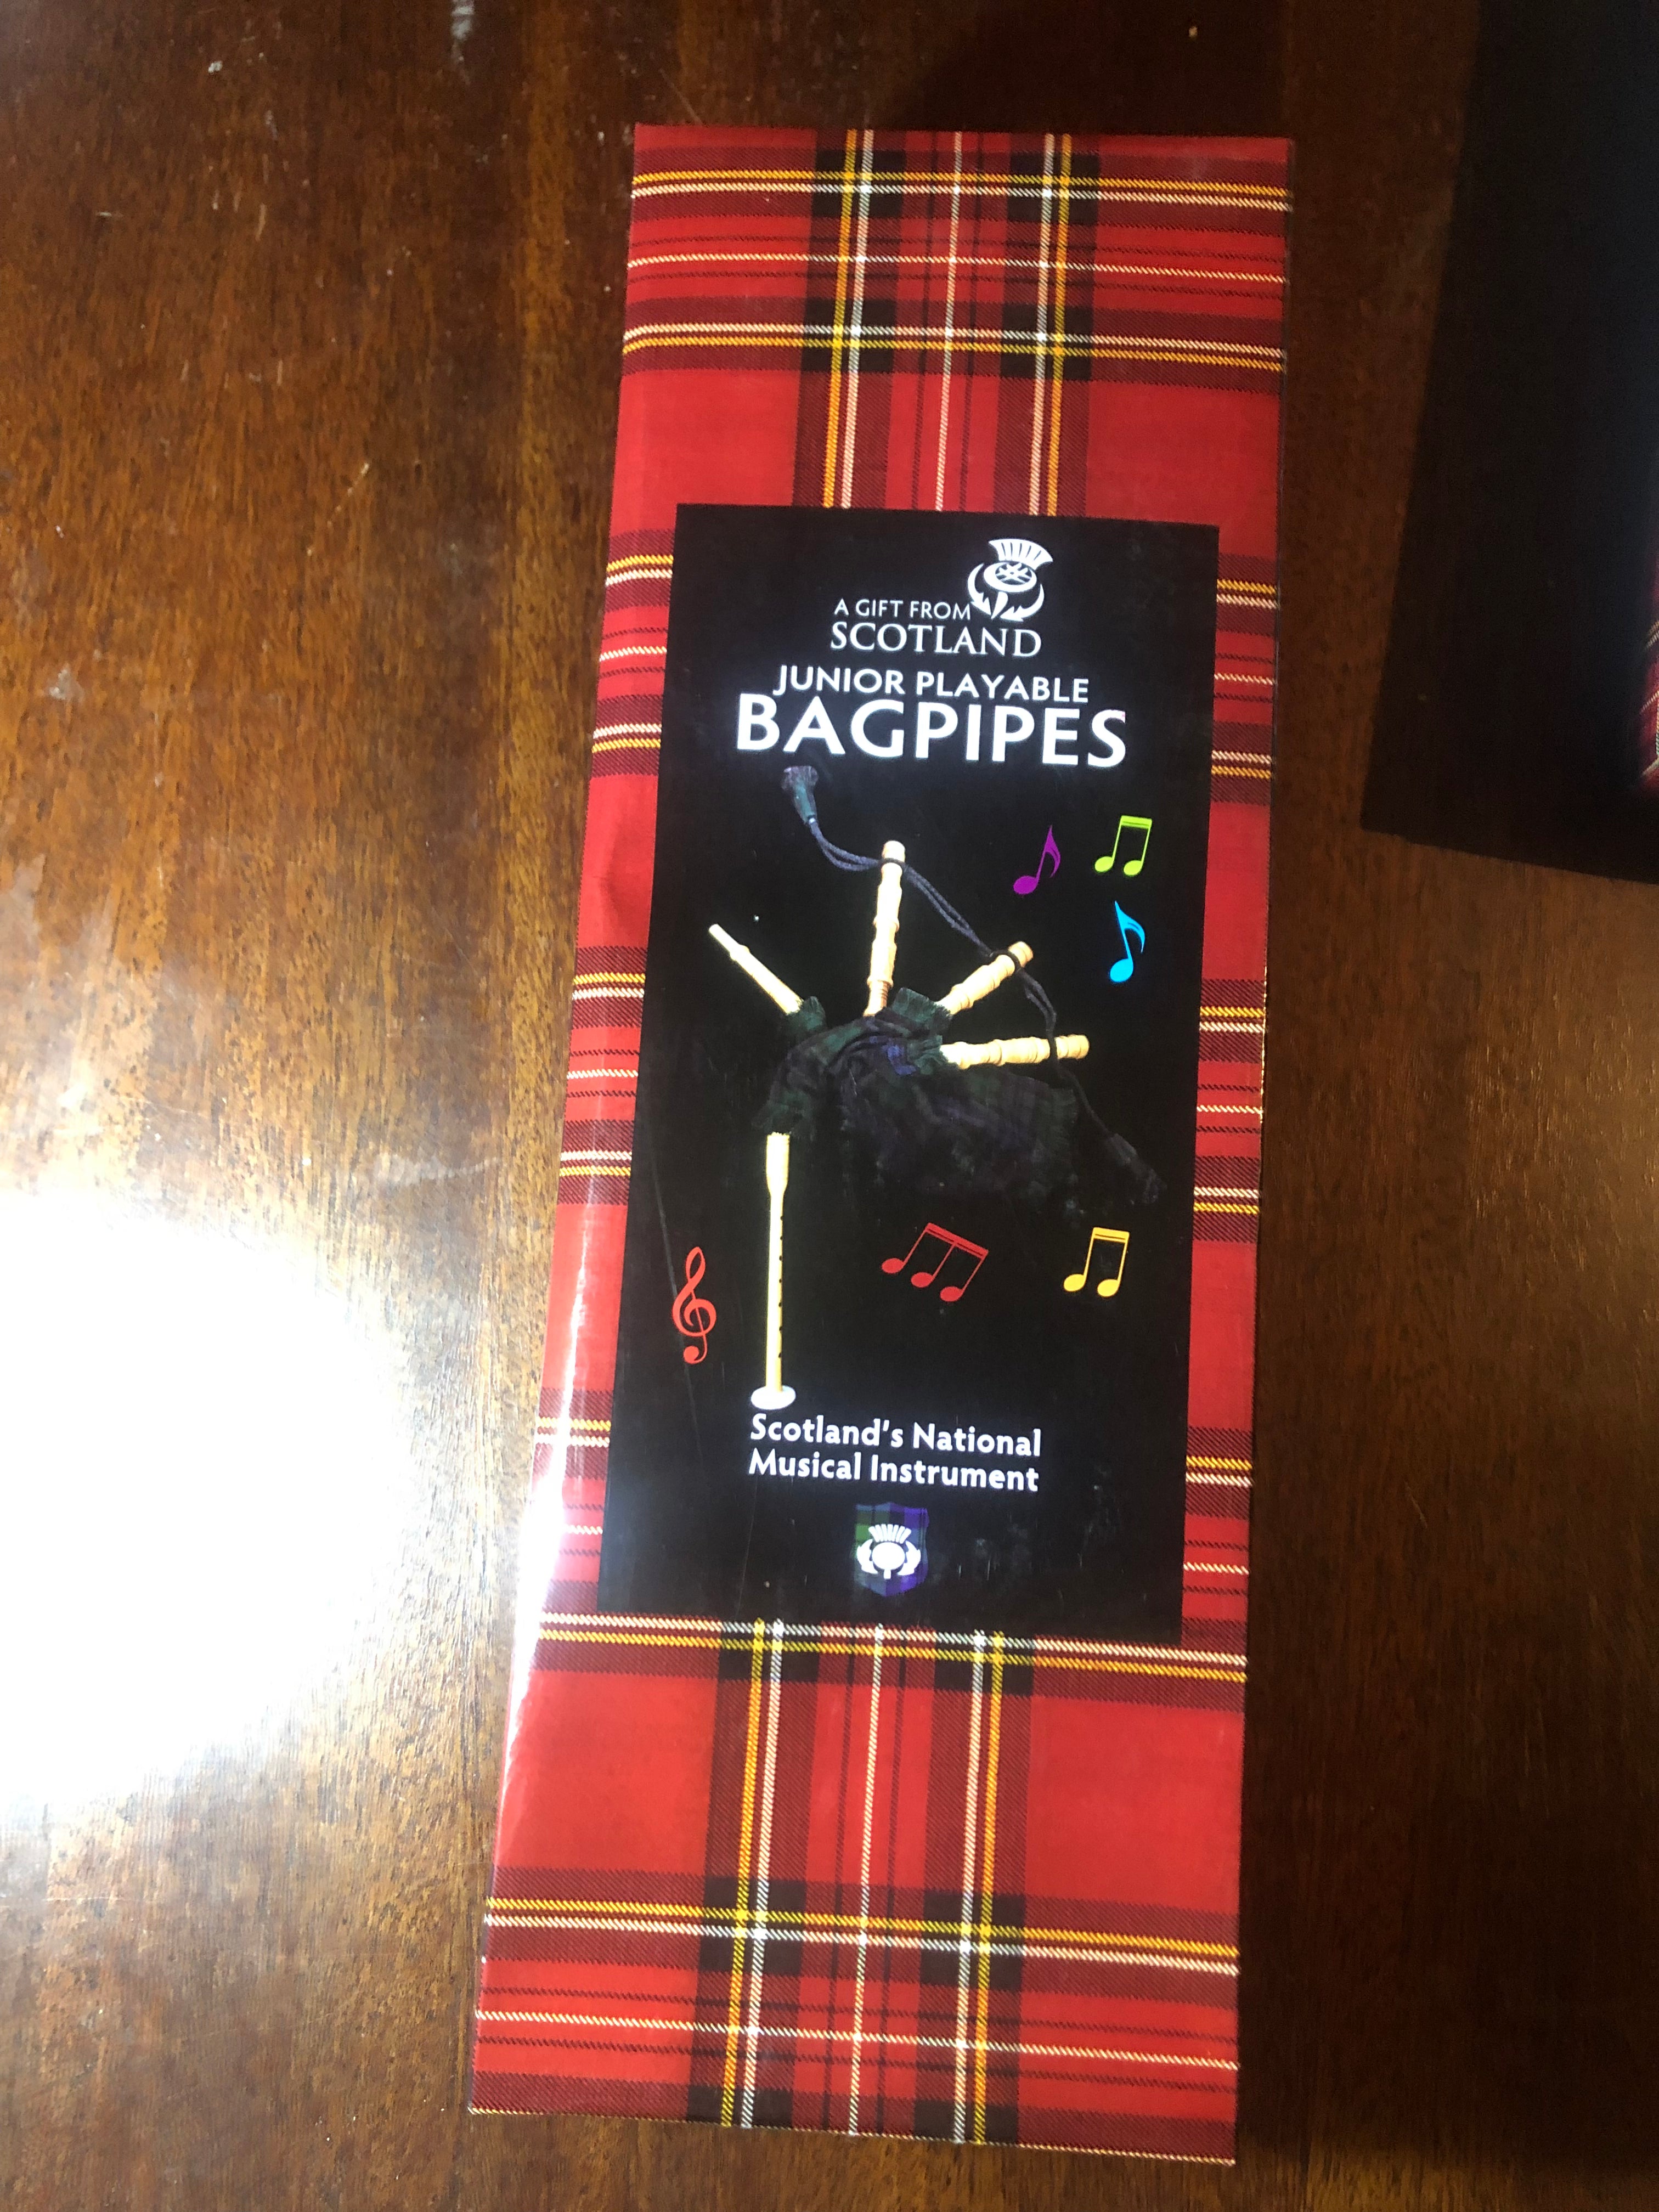 Junior playable bagpipes